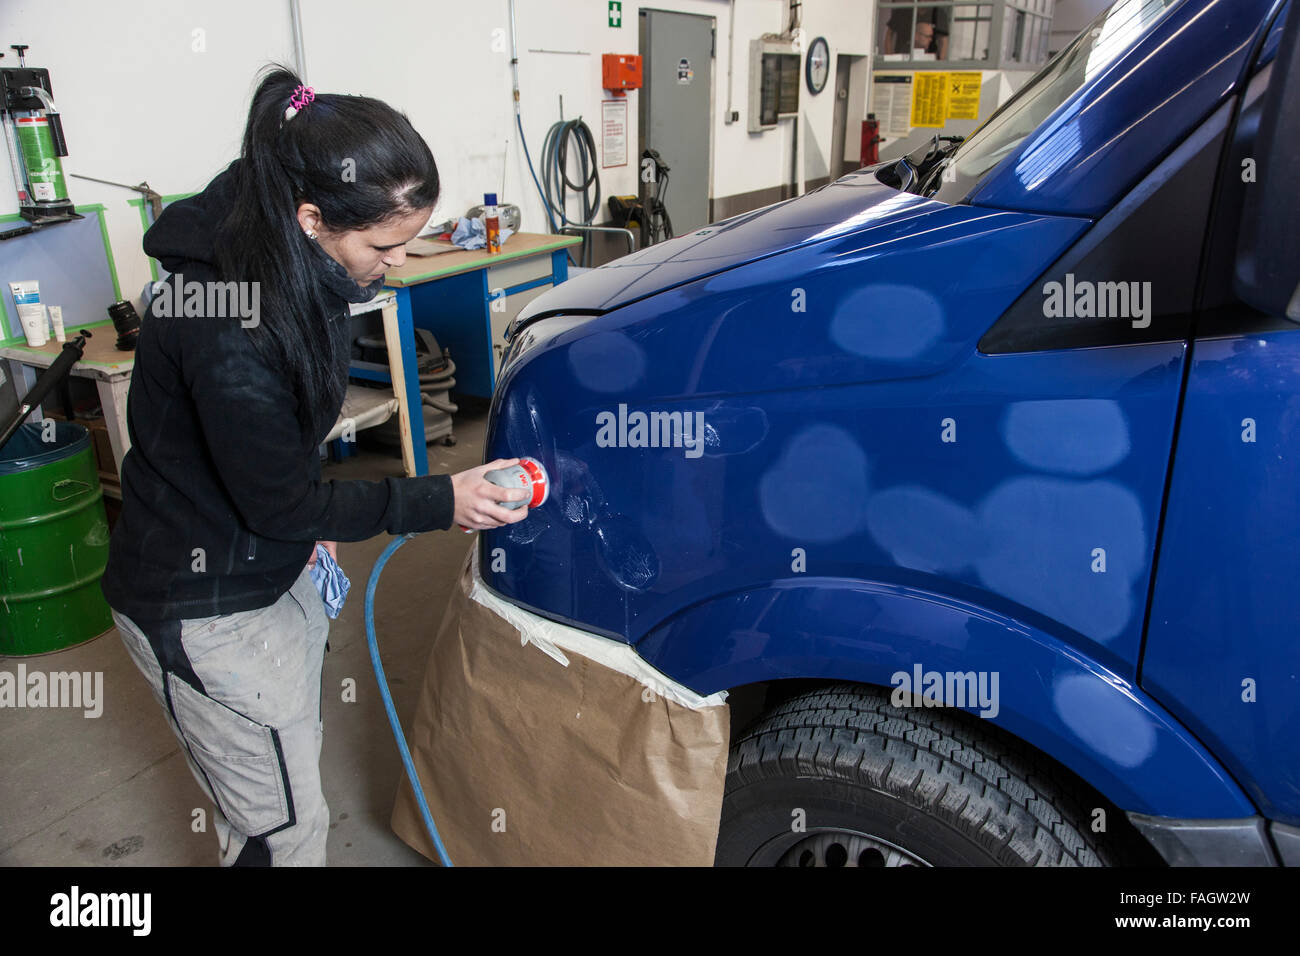 Car-body polishes the varnish of a vehicle. Stock Photo